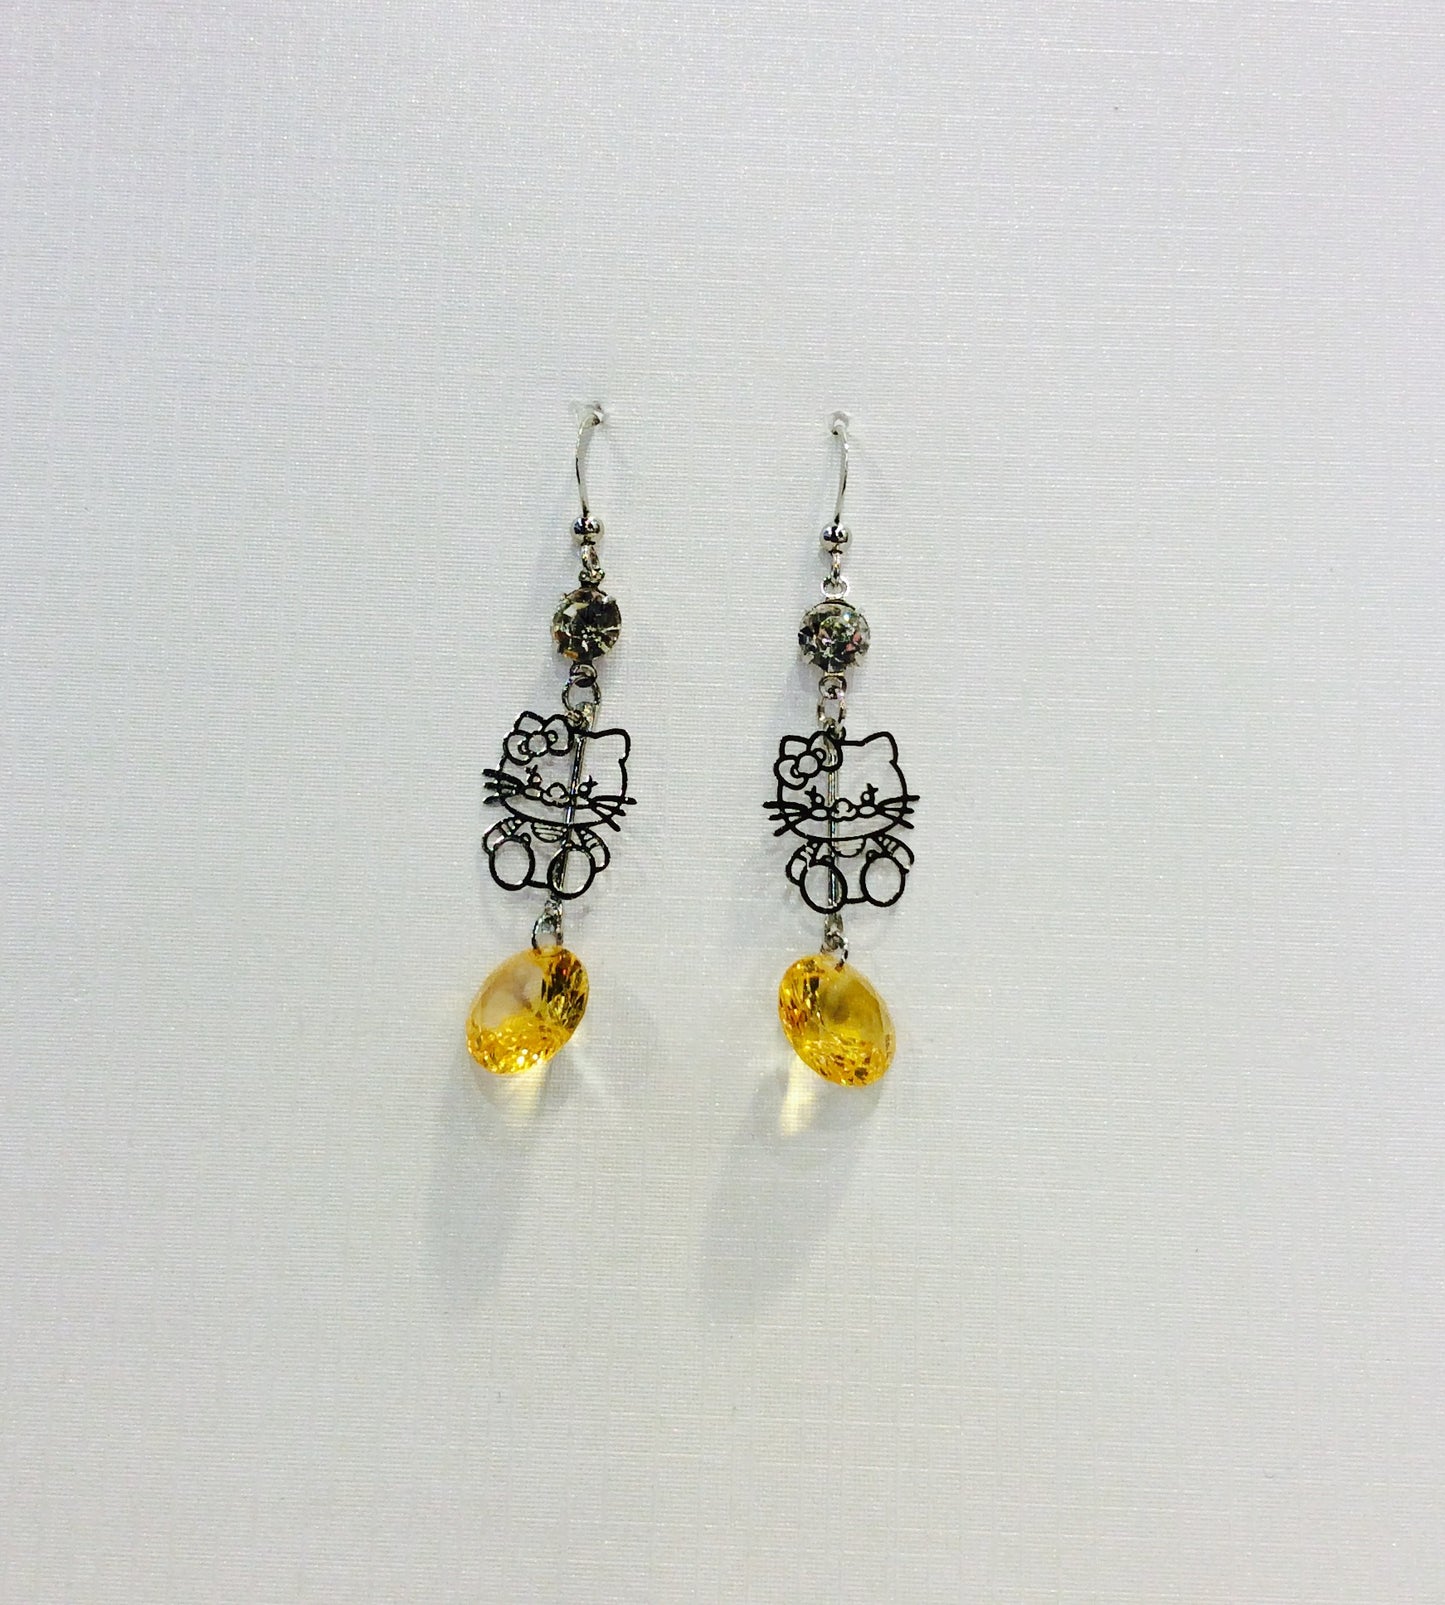 Kitty and Crystal Dangling Earrings #66-96004